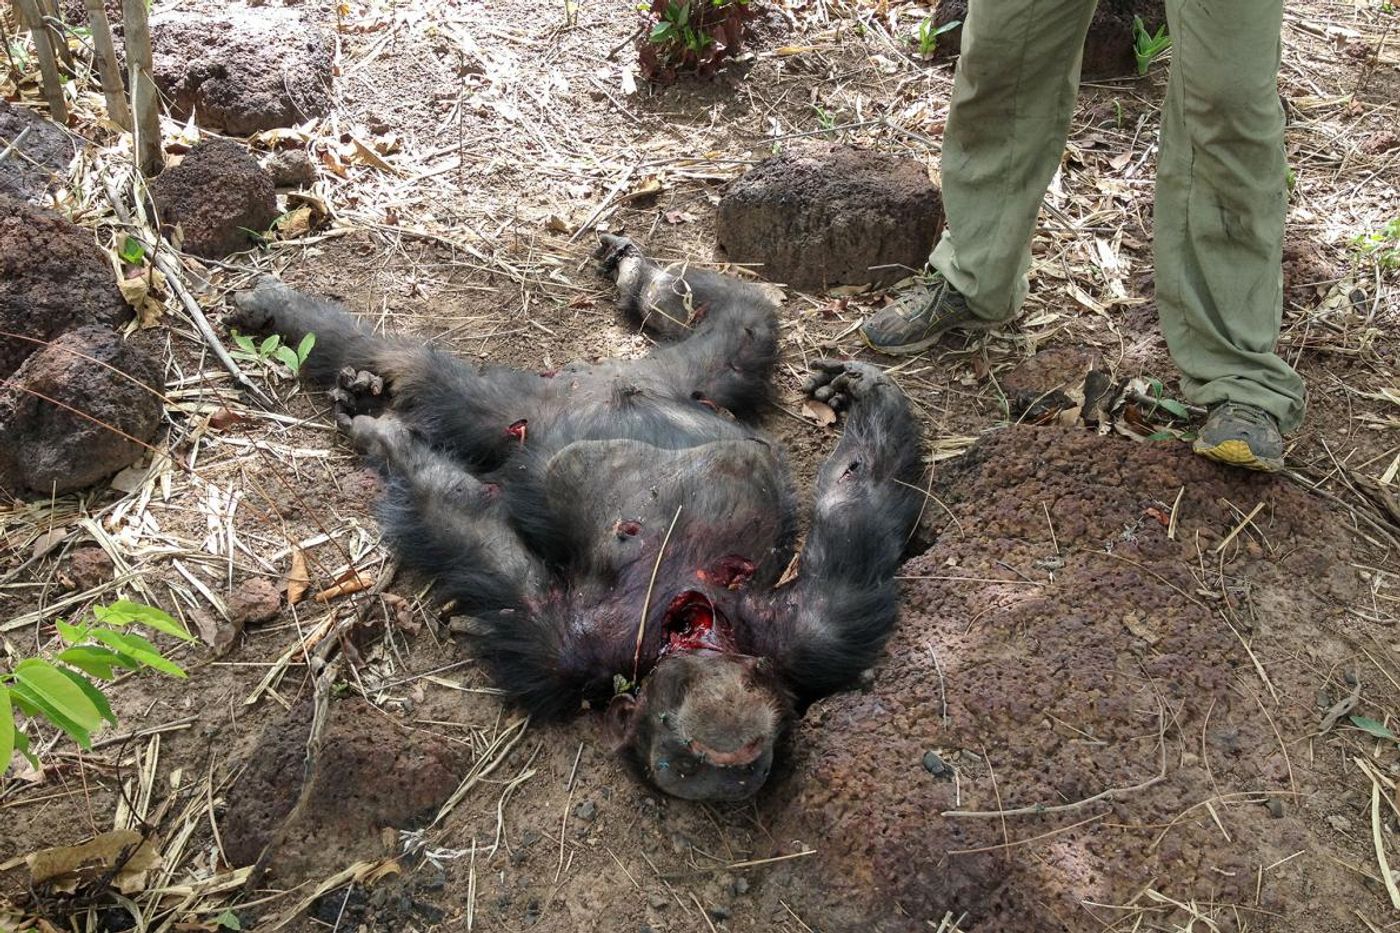 A graphic image of Foudouko's mauled body after the incident.